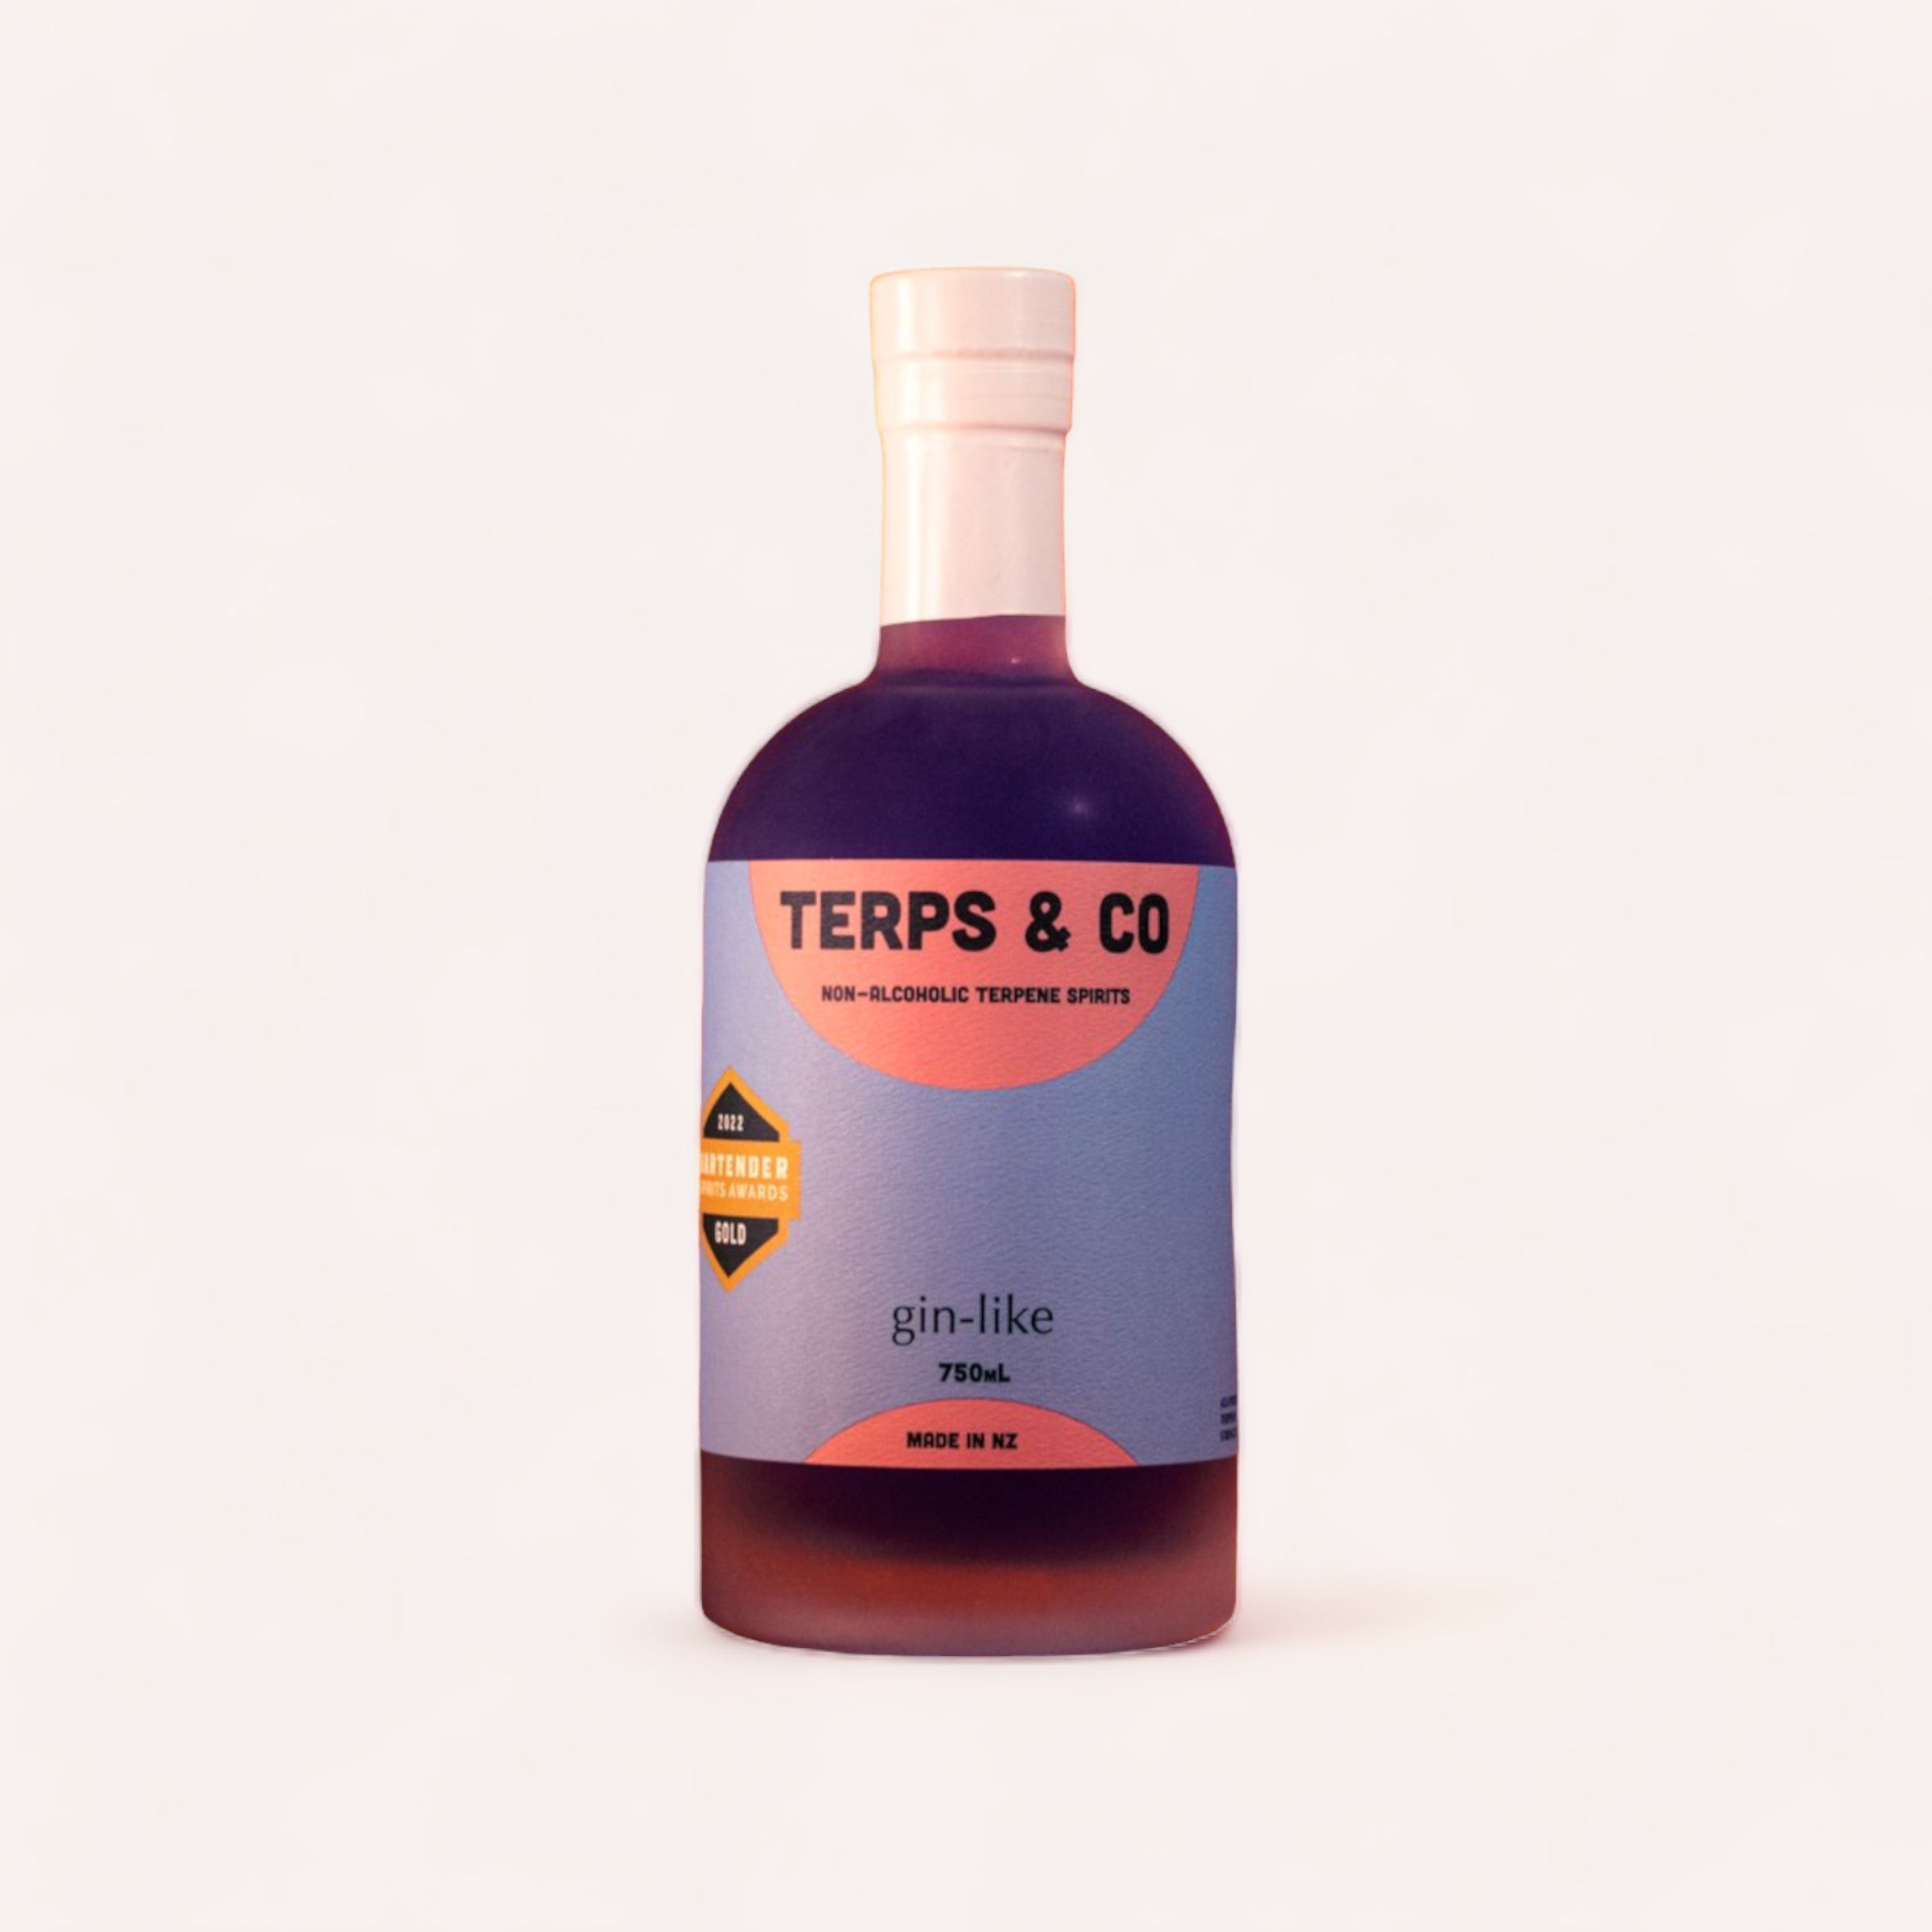 A bottle of Gin-like by Terps & Co zero alcohol gin, a botanical spirit, on a plain background.